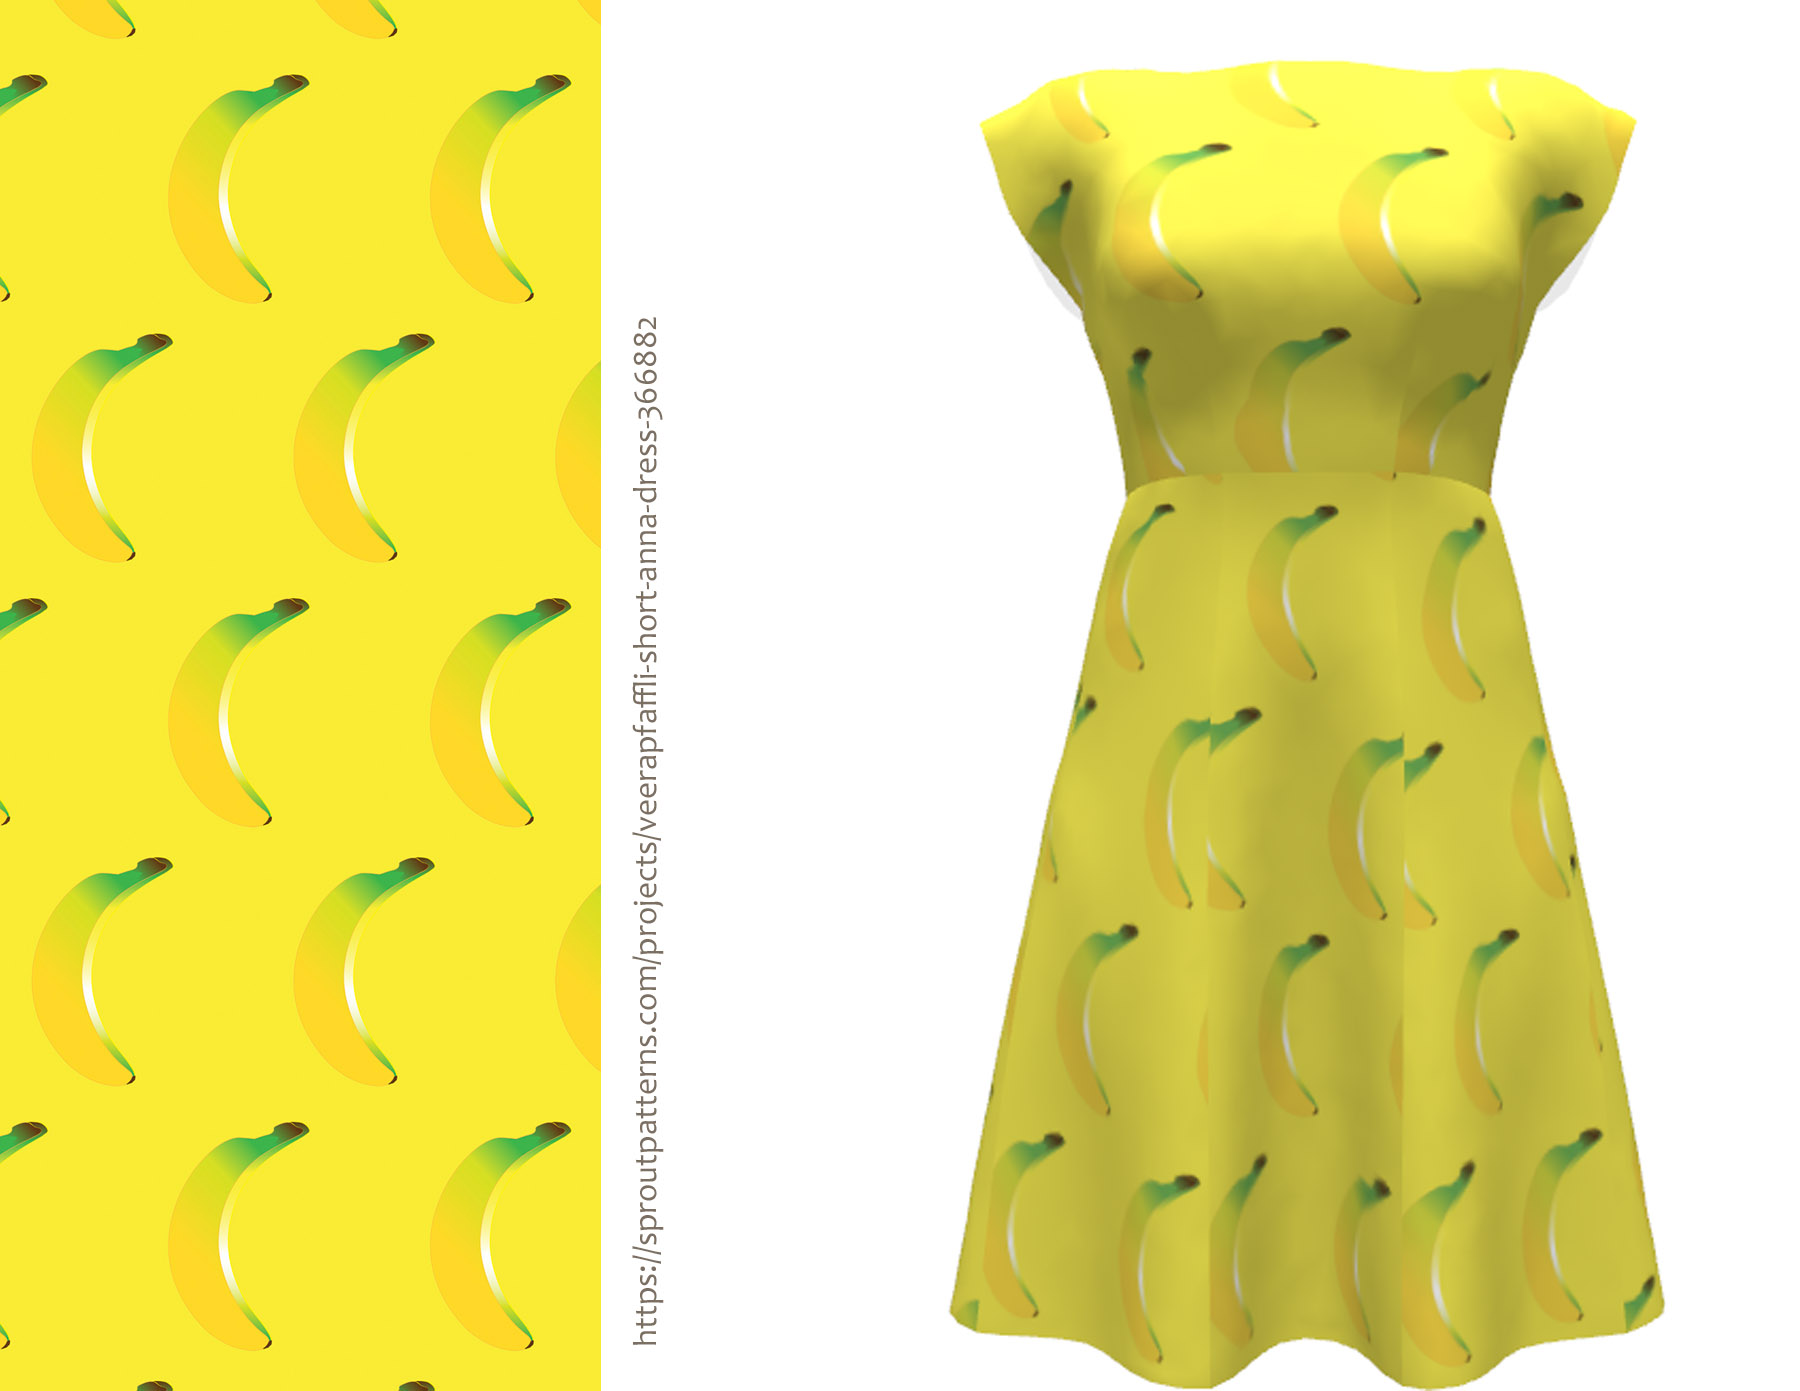 Anna dress on Sprout patterns goes bananas